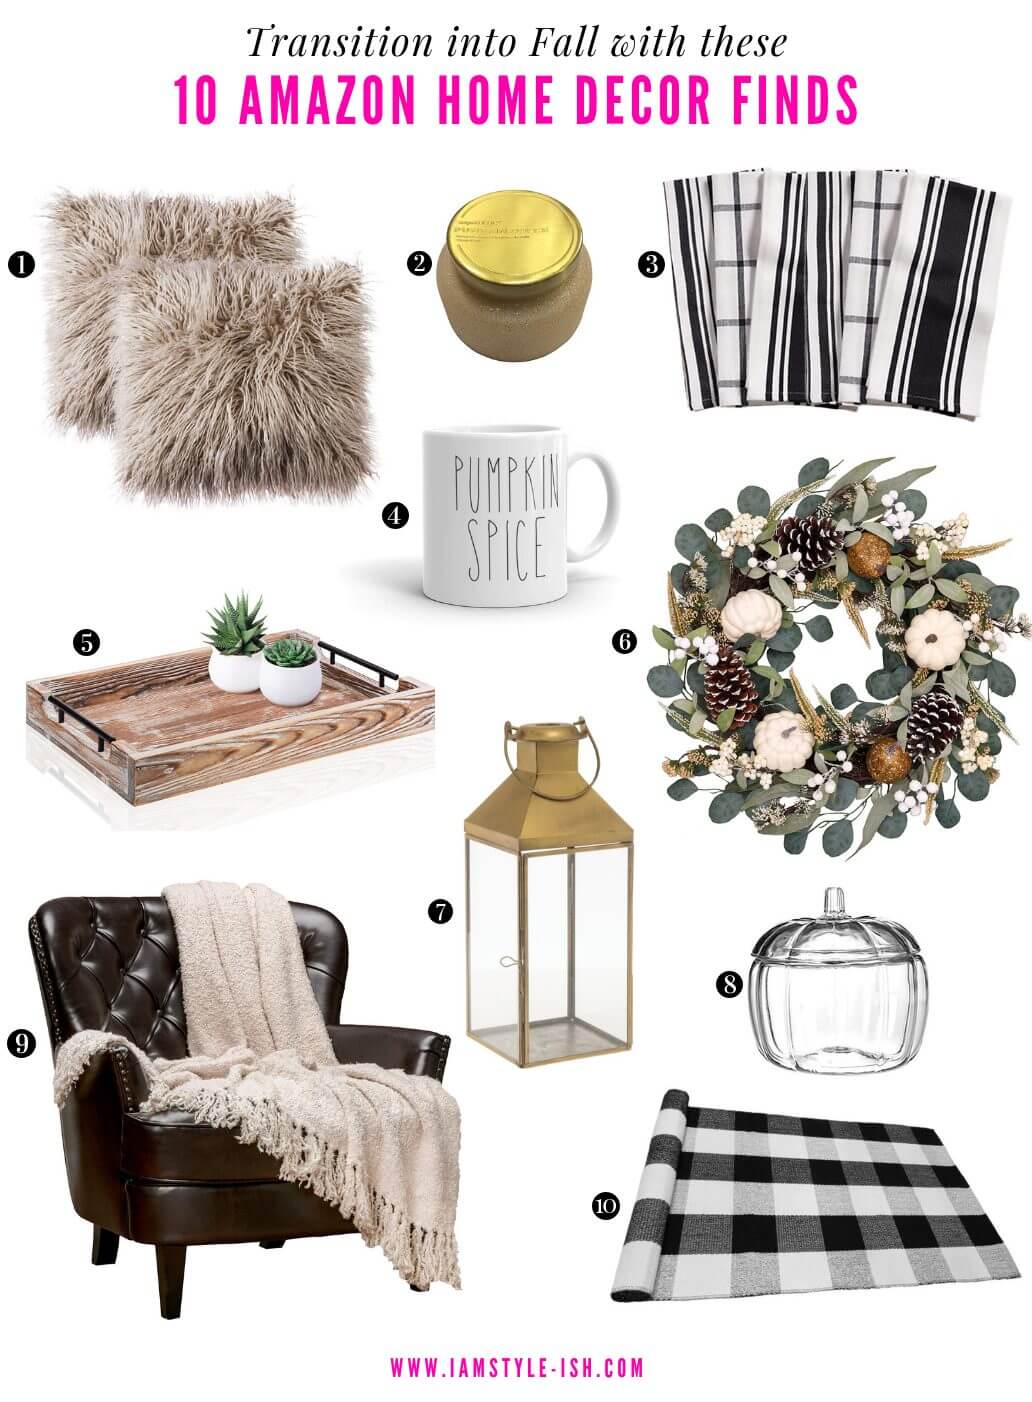 transition into fall with these 10 amazon home decor finds, home decor, fall home decor, fall home decor inspiration, how to update your home for fall, amazon home decor, amazon home finds, pumpkin decor, fall decor, fall decorating ideas, fall decor ideas, home decor ideas